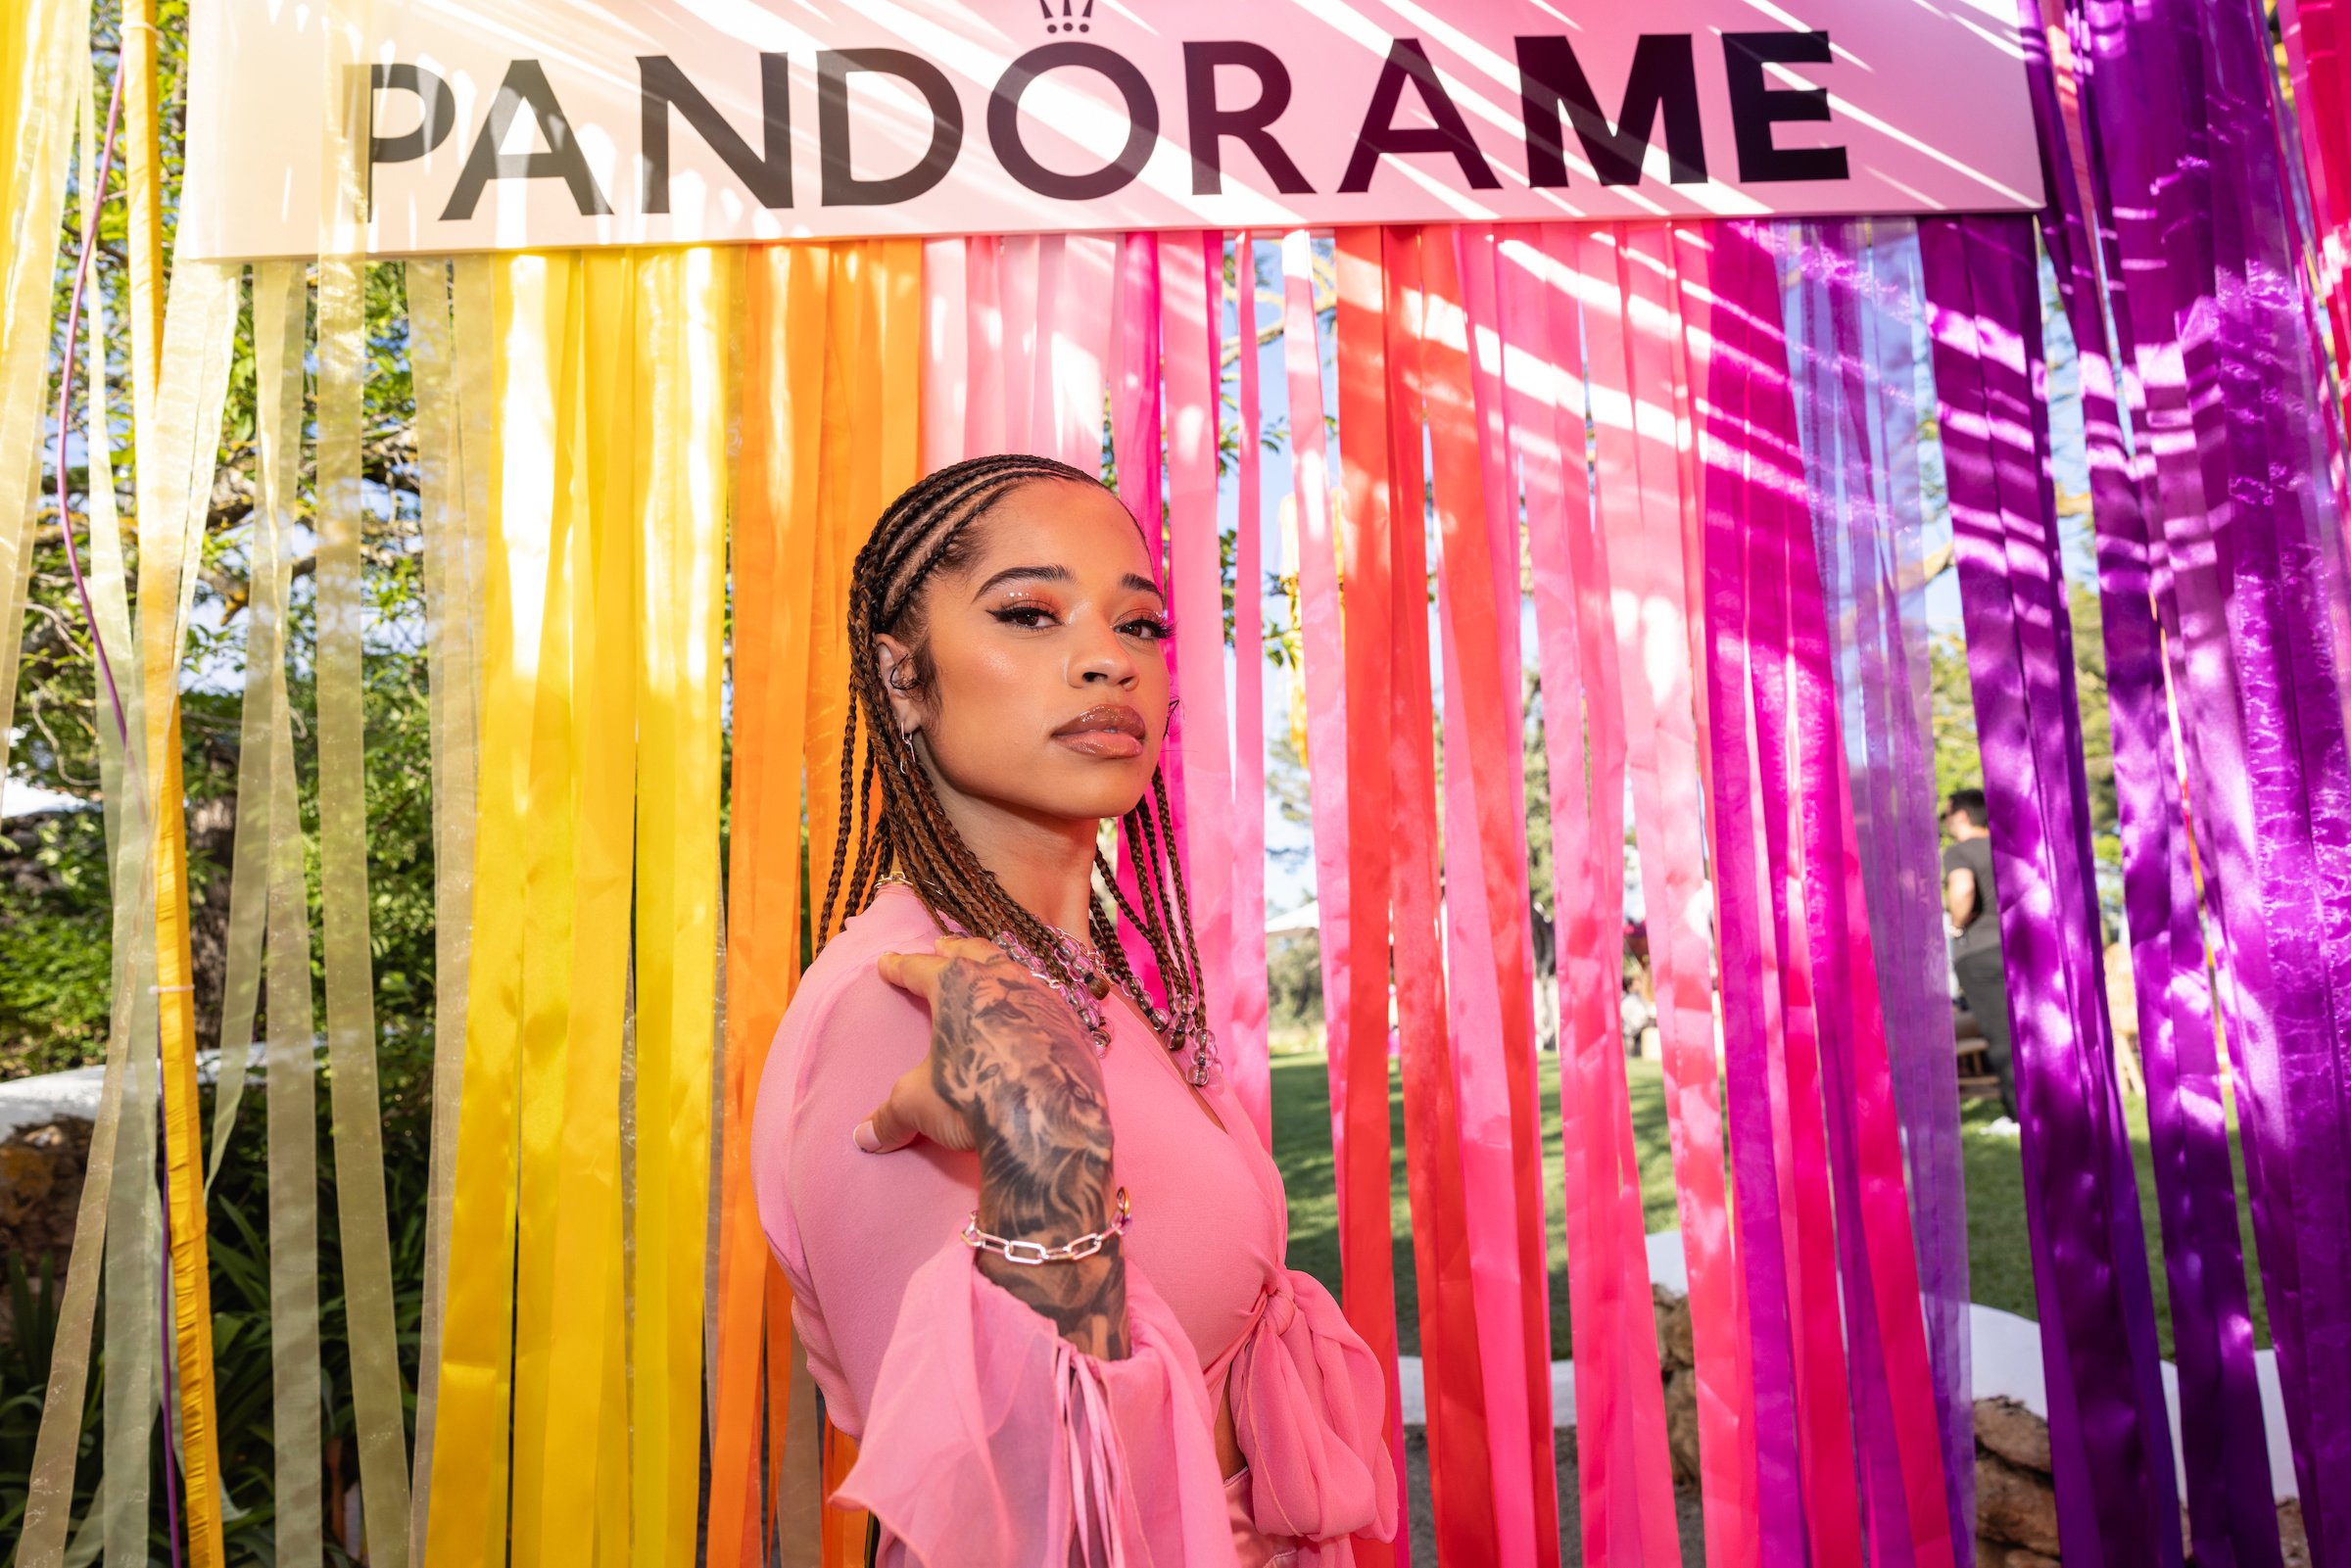 Ella Mai, who has been mentored by Mary J. Blige, on a rainbow background